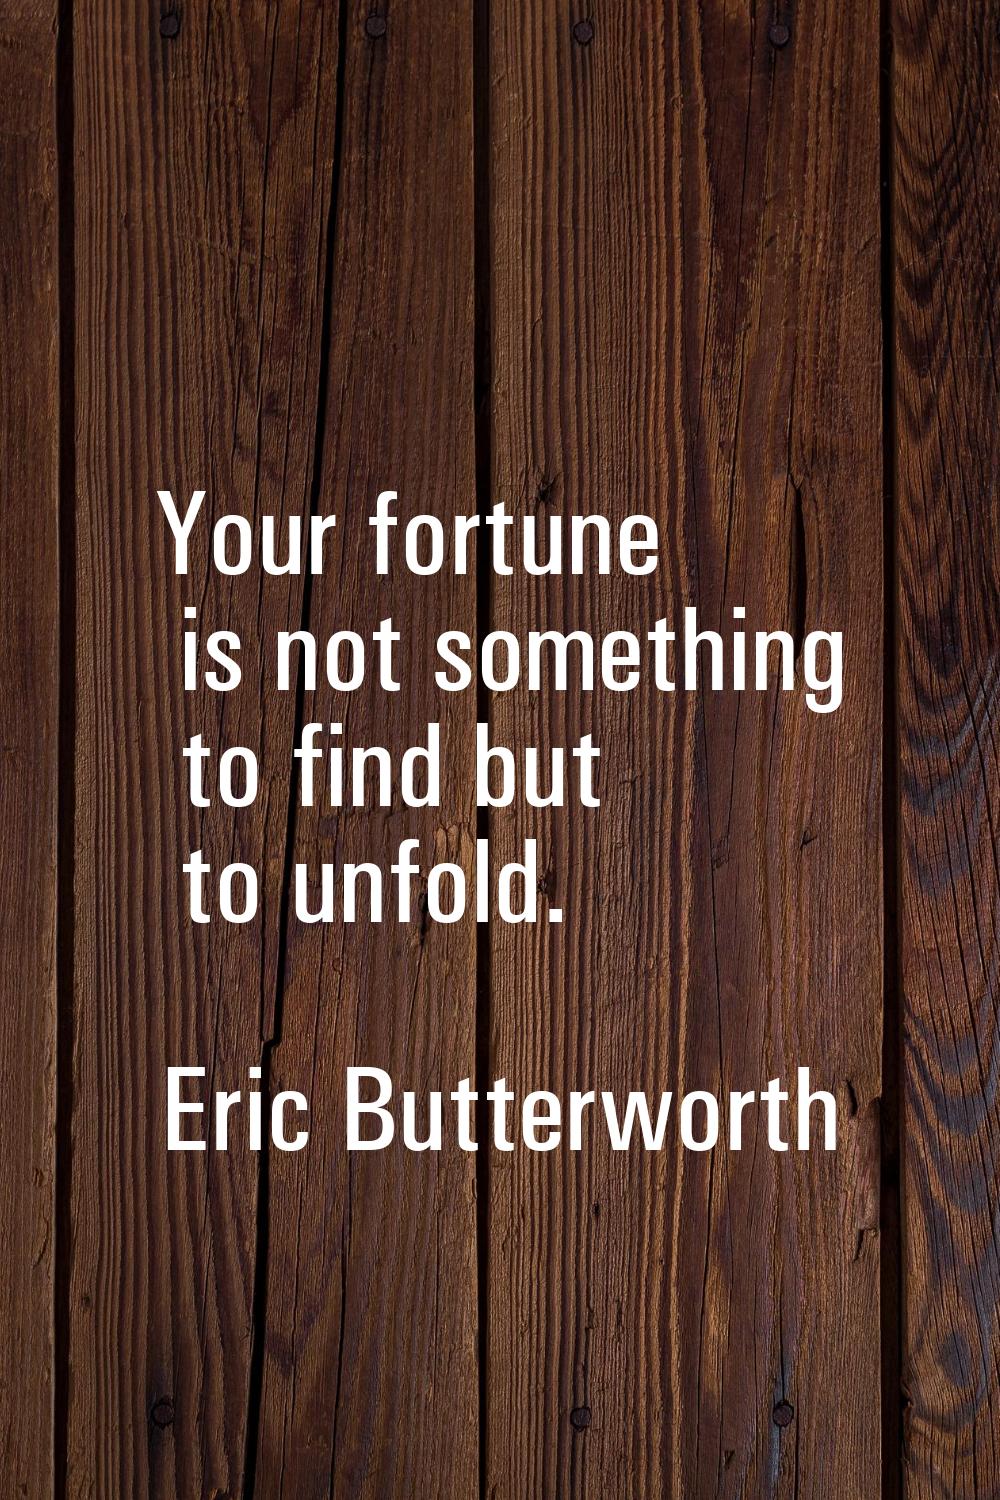 Your fortune is not something to find but to unfold.